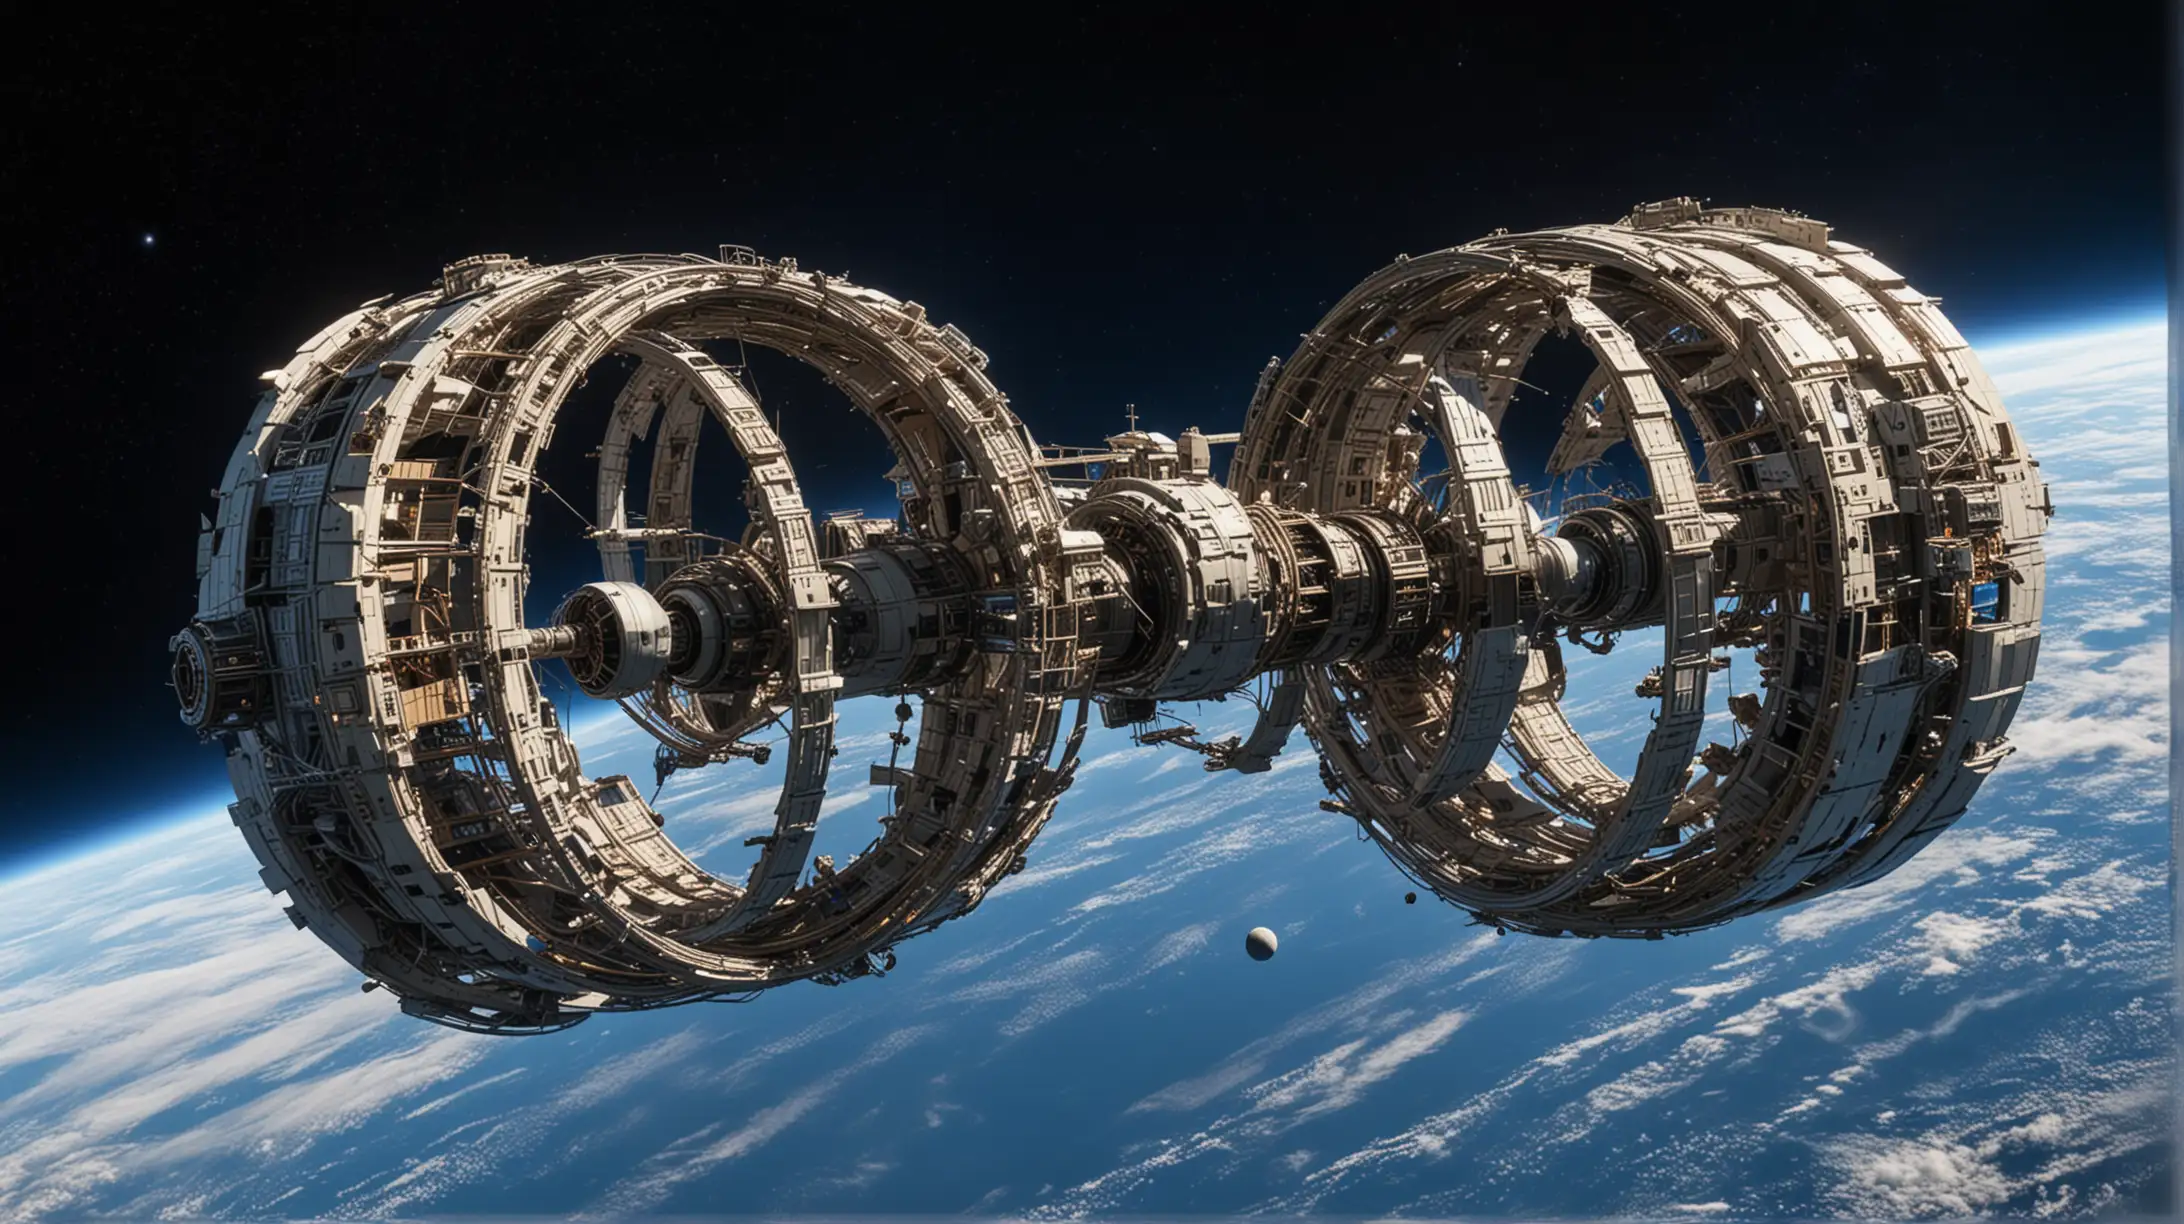 a big toroidal space station in orbit around the Earth